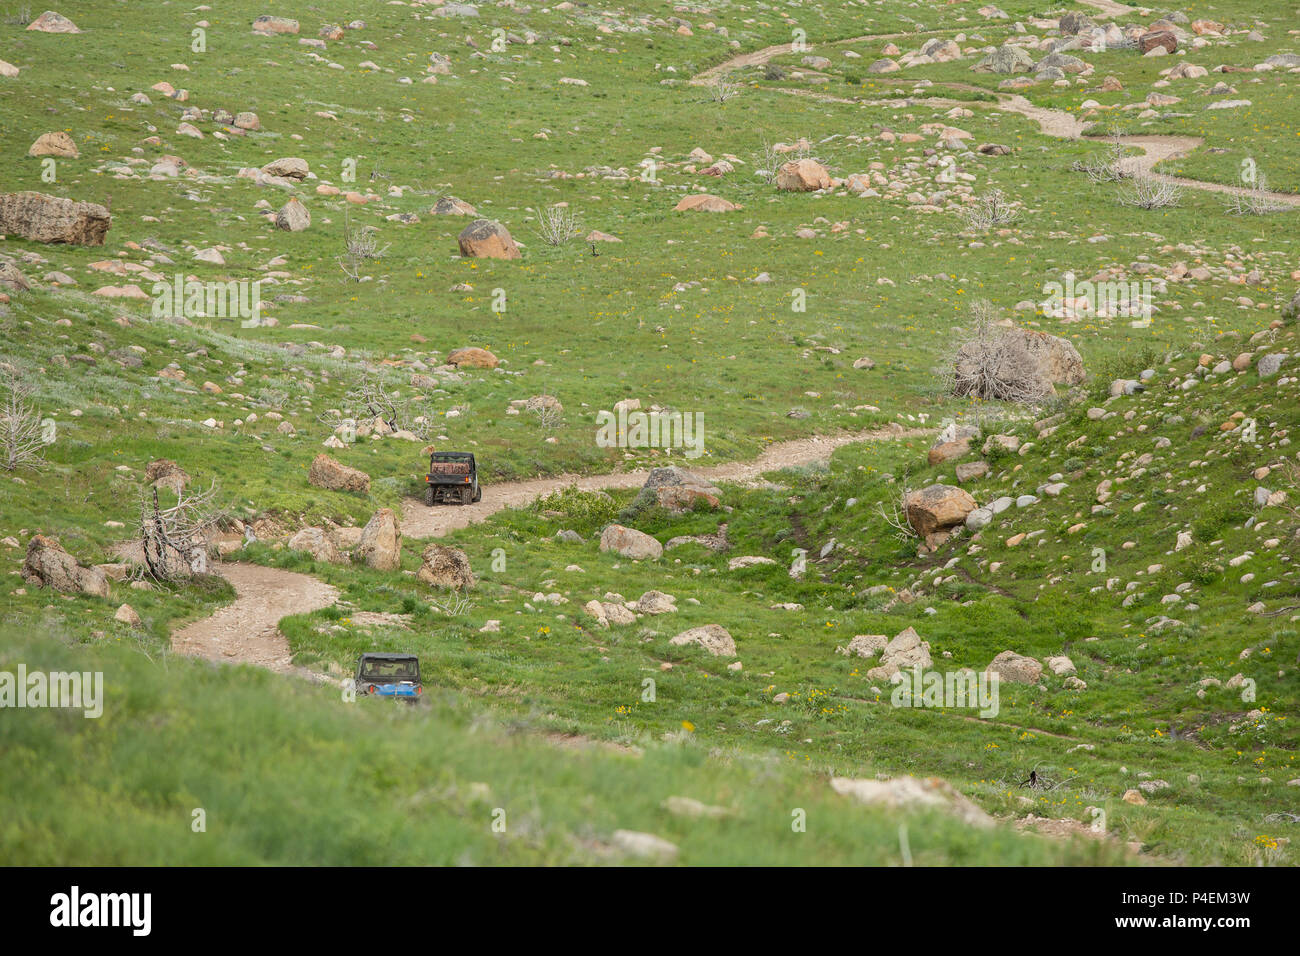 Two ATVs driving along a dirt road, Wyoming, United States Stock Photo